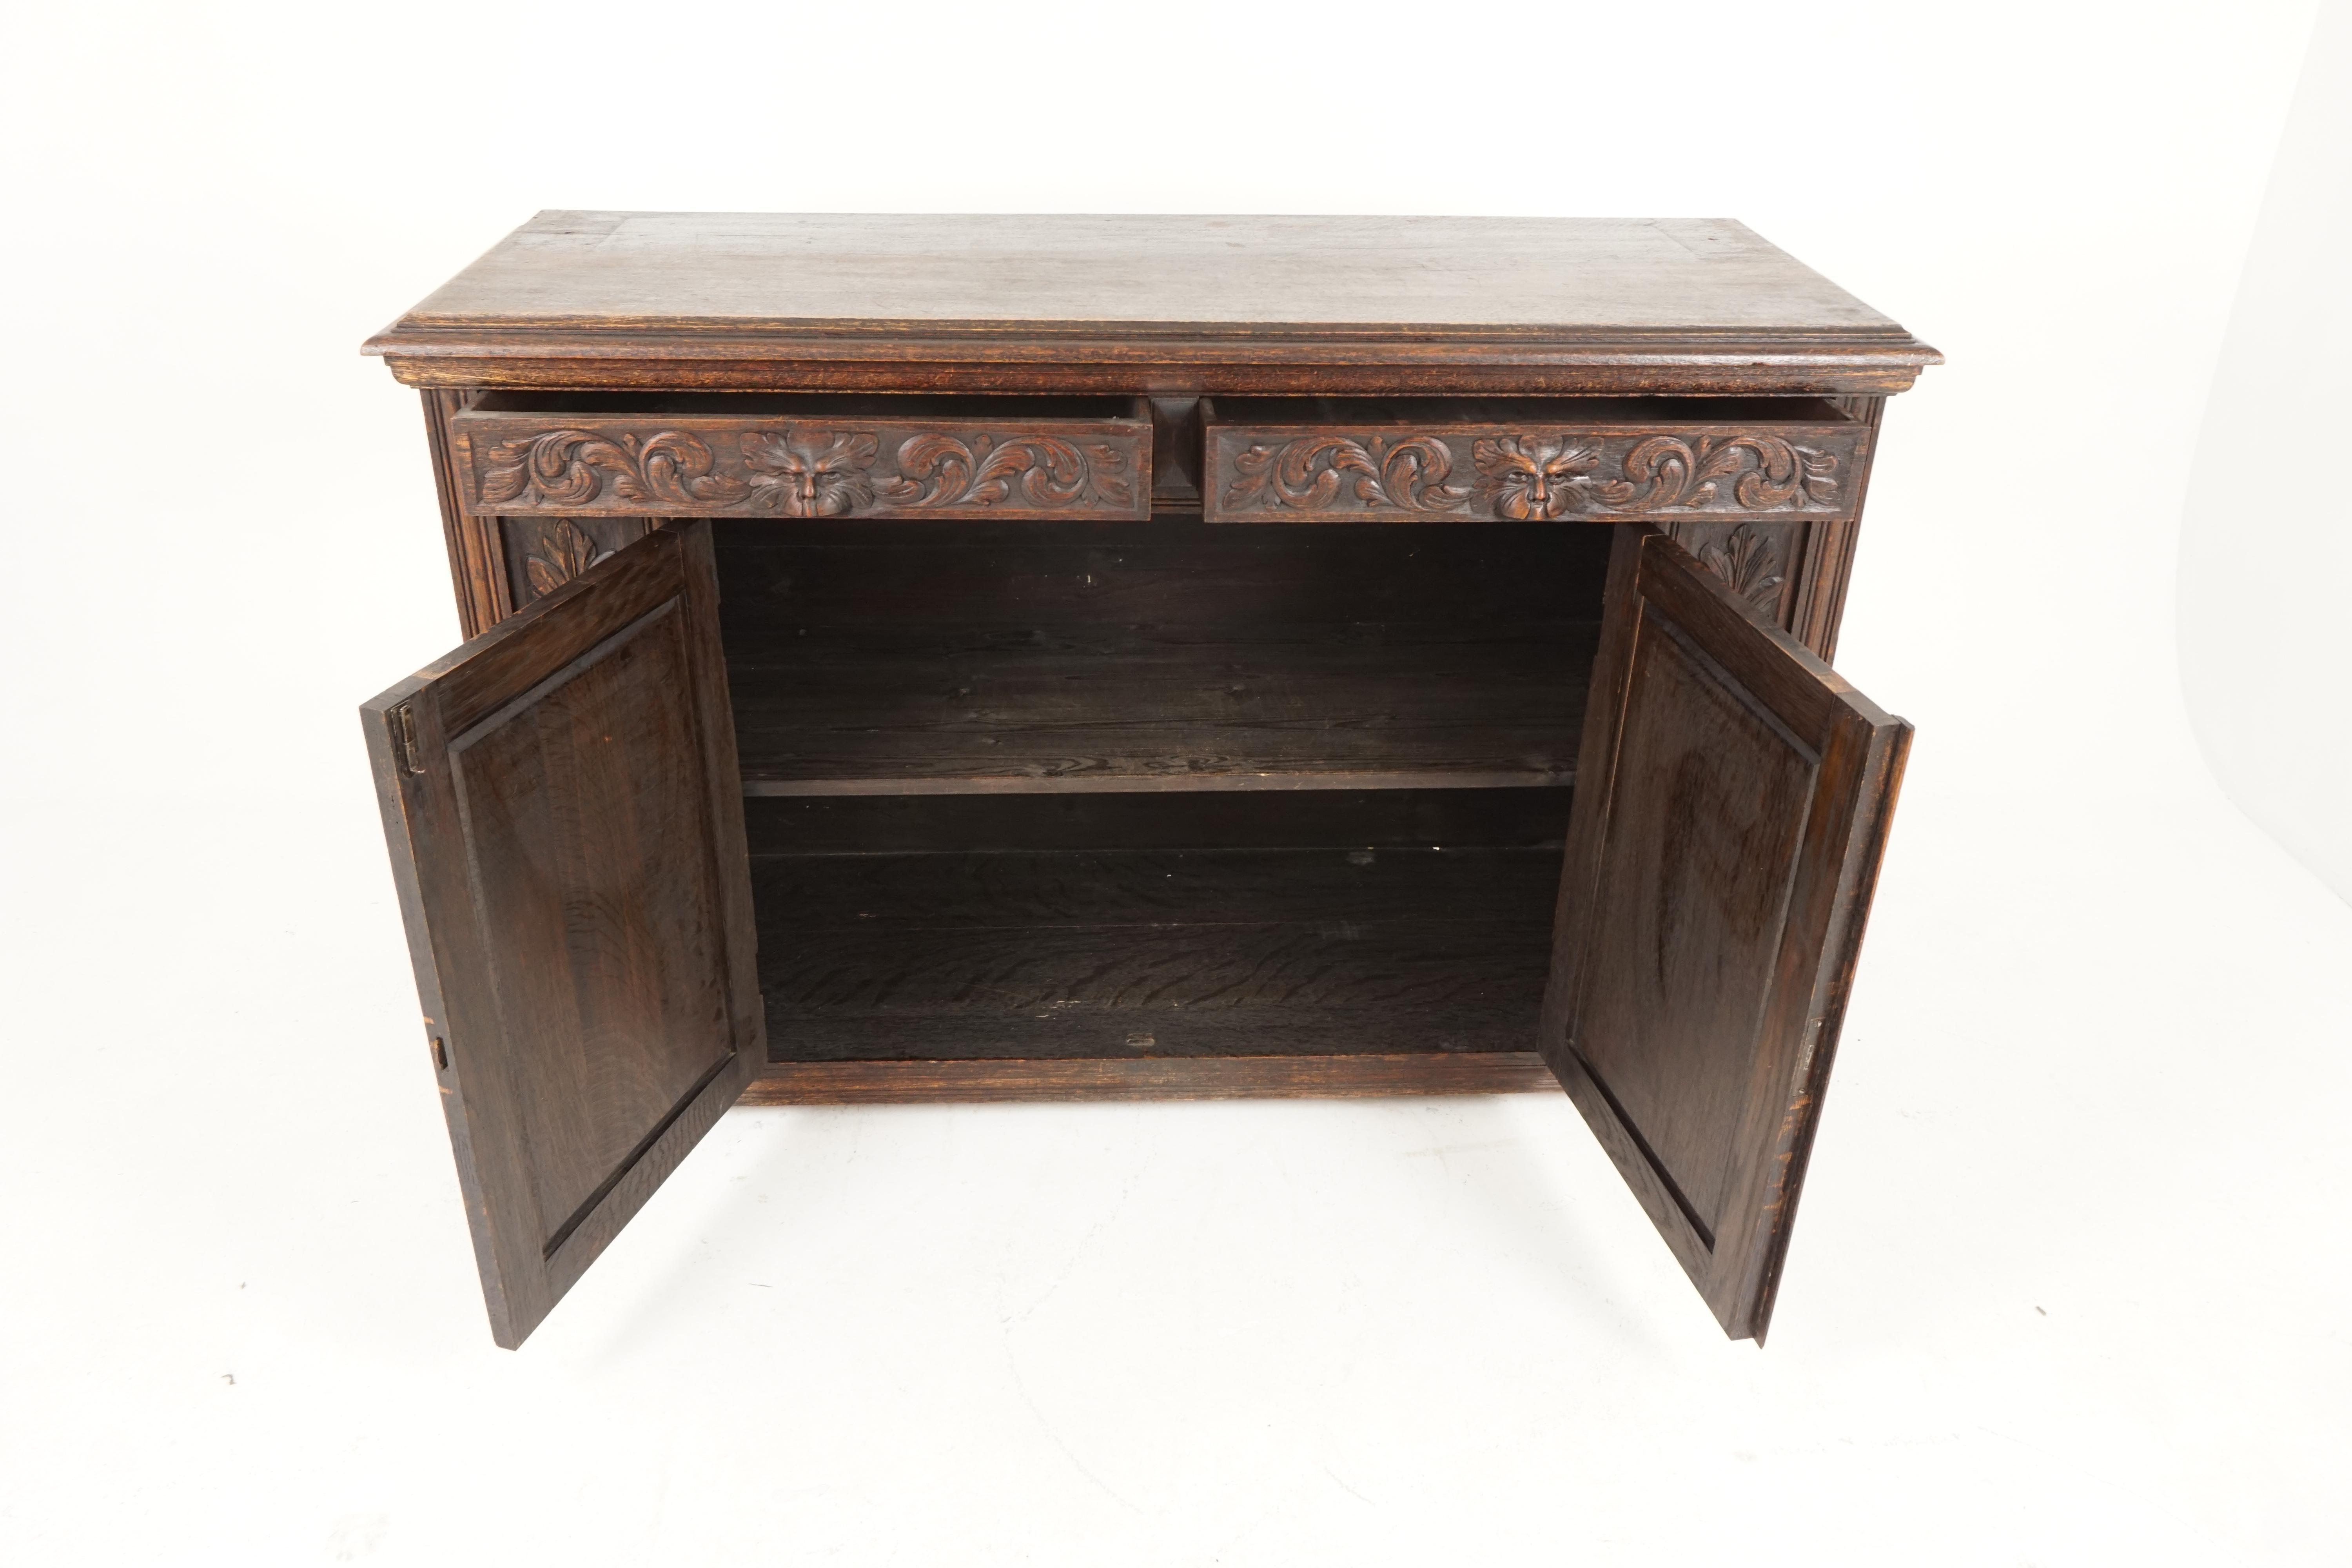 Antique green man Gothic carved oak sideboard, buffet, Scotland 1880, B2254

Scotland, 1880
Solid oak
Original finish
Rectangular top with moulded edge
Pair of carved green man drawers
Underneath is a pair of caved paneled doors
Opens to